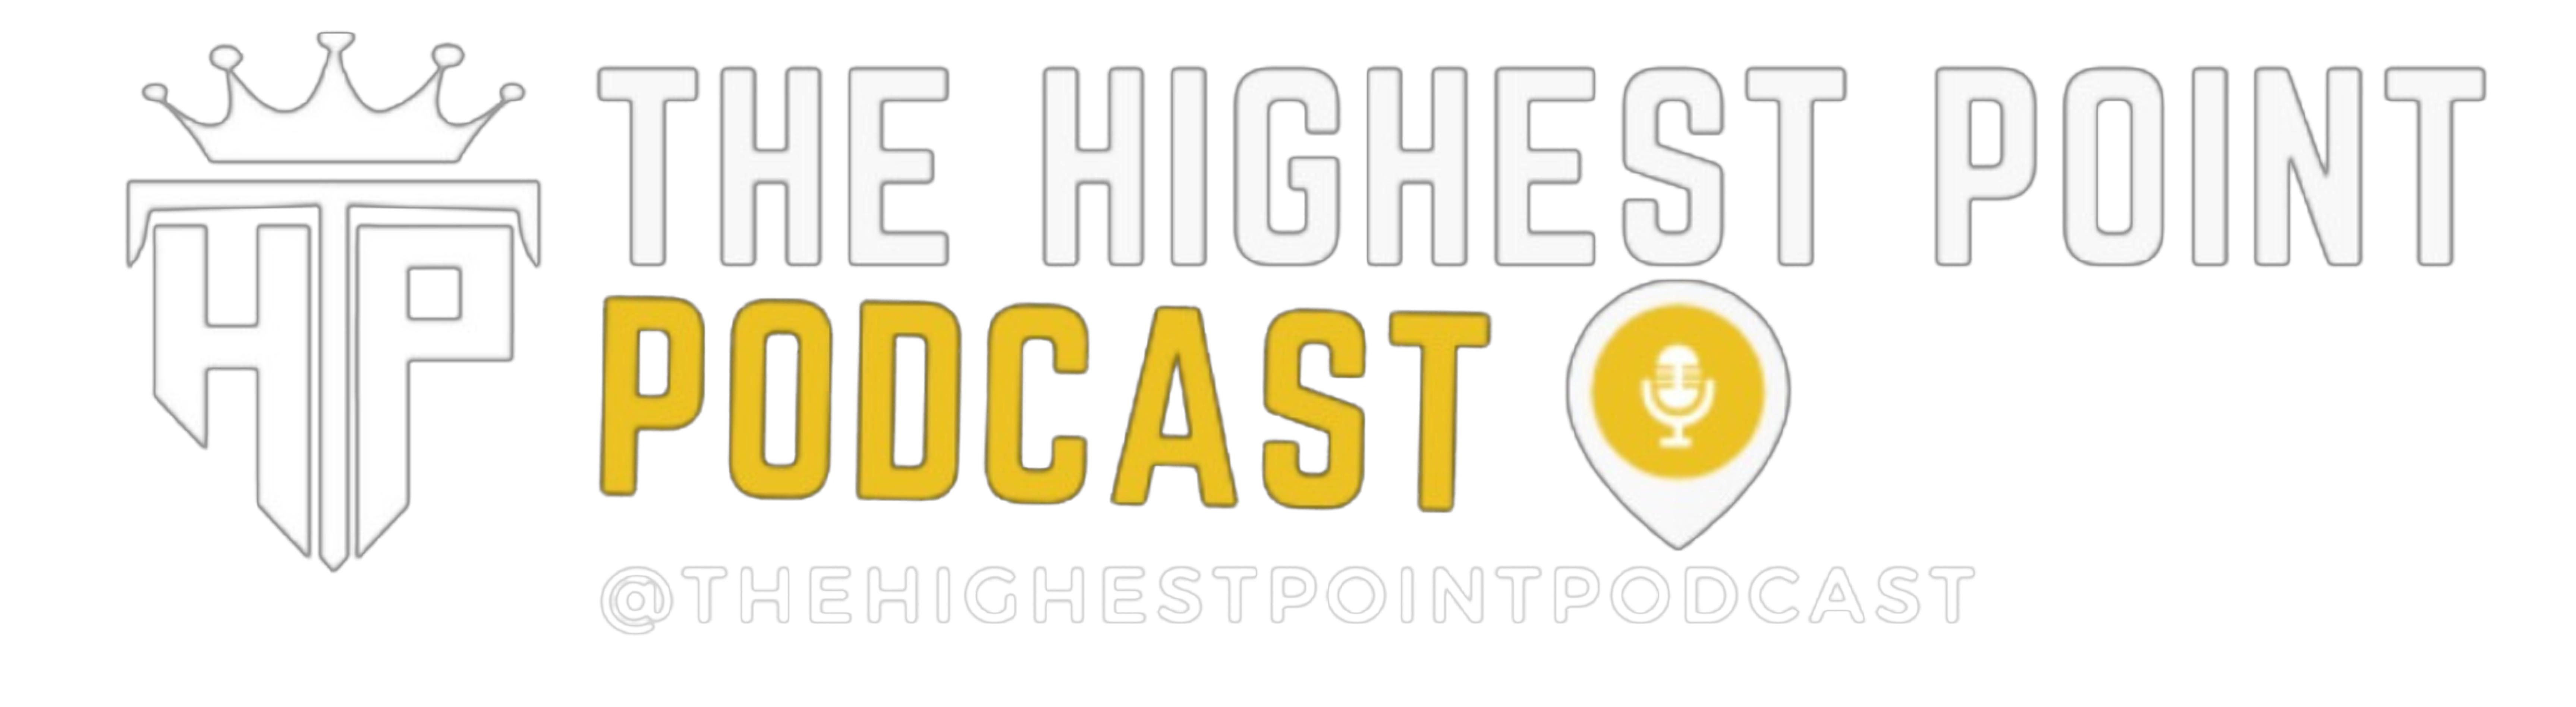 THE HIGHEST POINT PODCAST